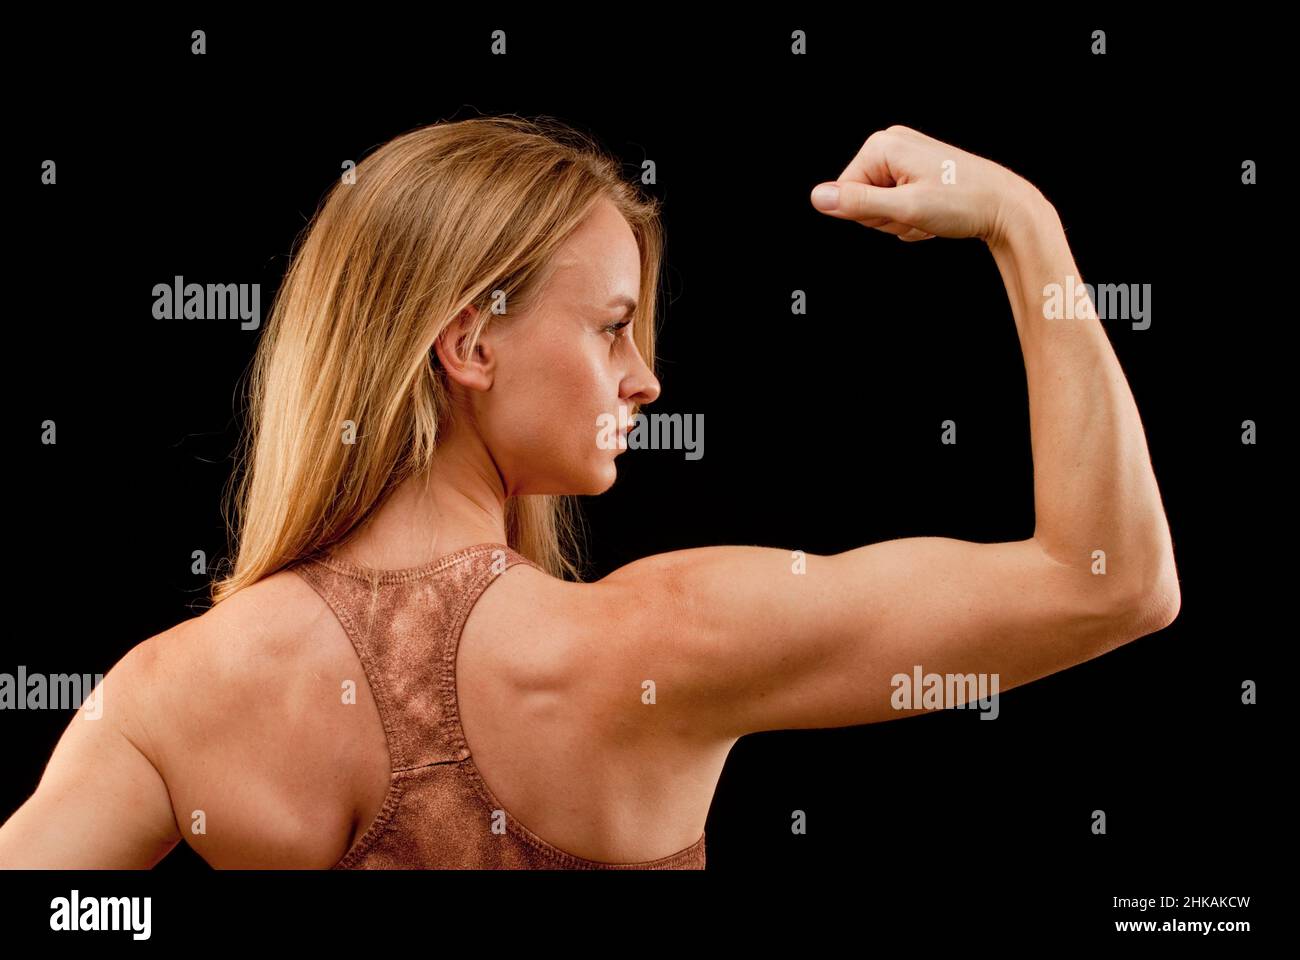 Portrait, fitness and bicep with a woman athlete flexing her arm muscle in  the gym during a workout Stock Photo by YuriArcursPeopleimages